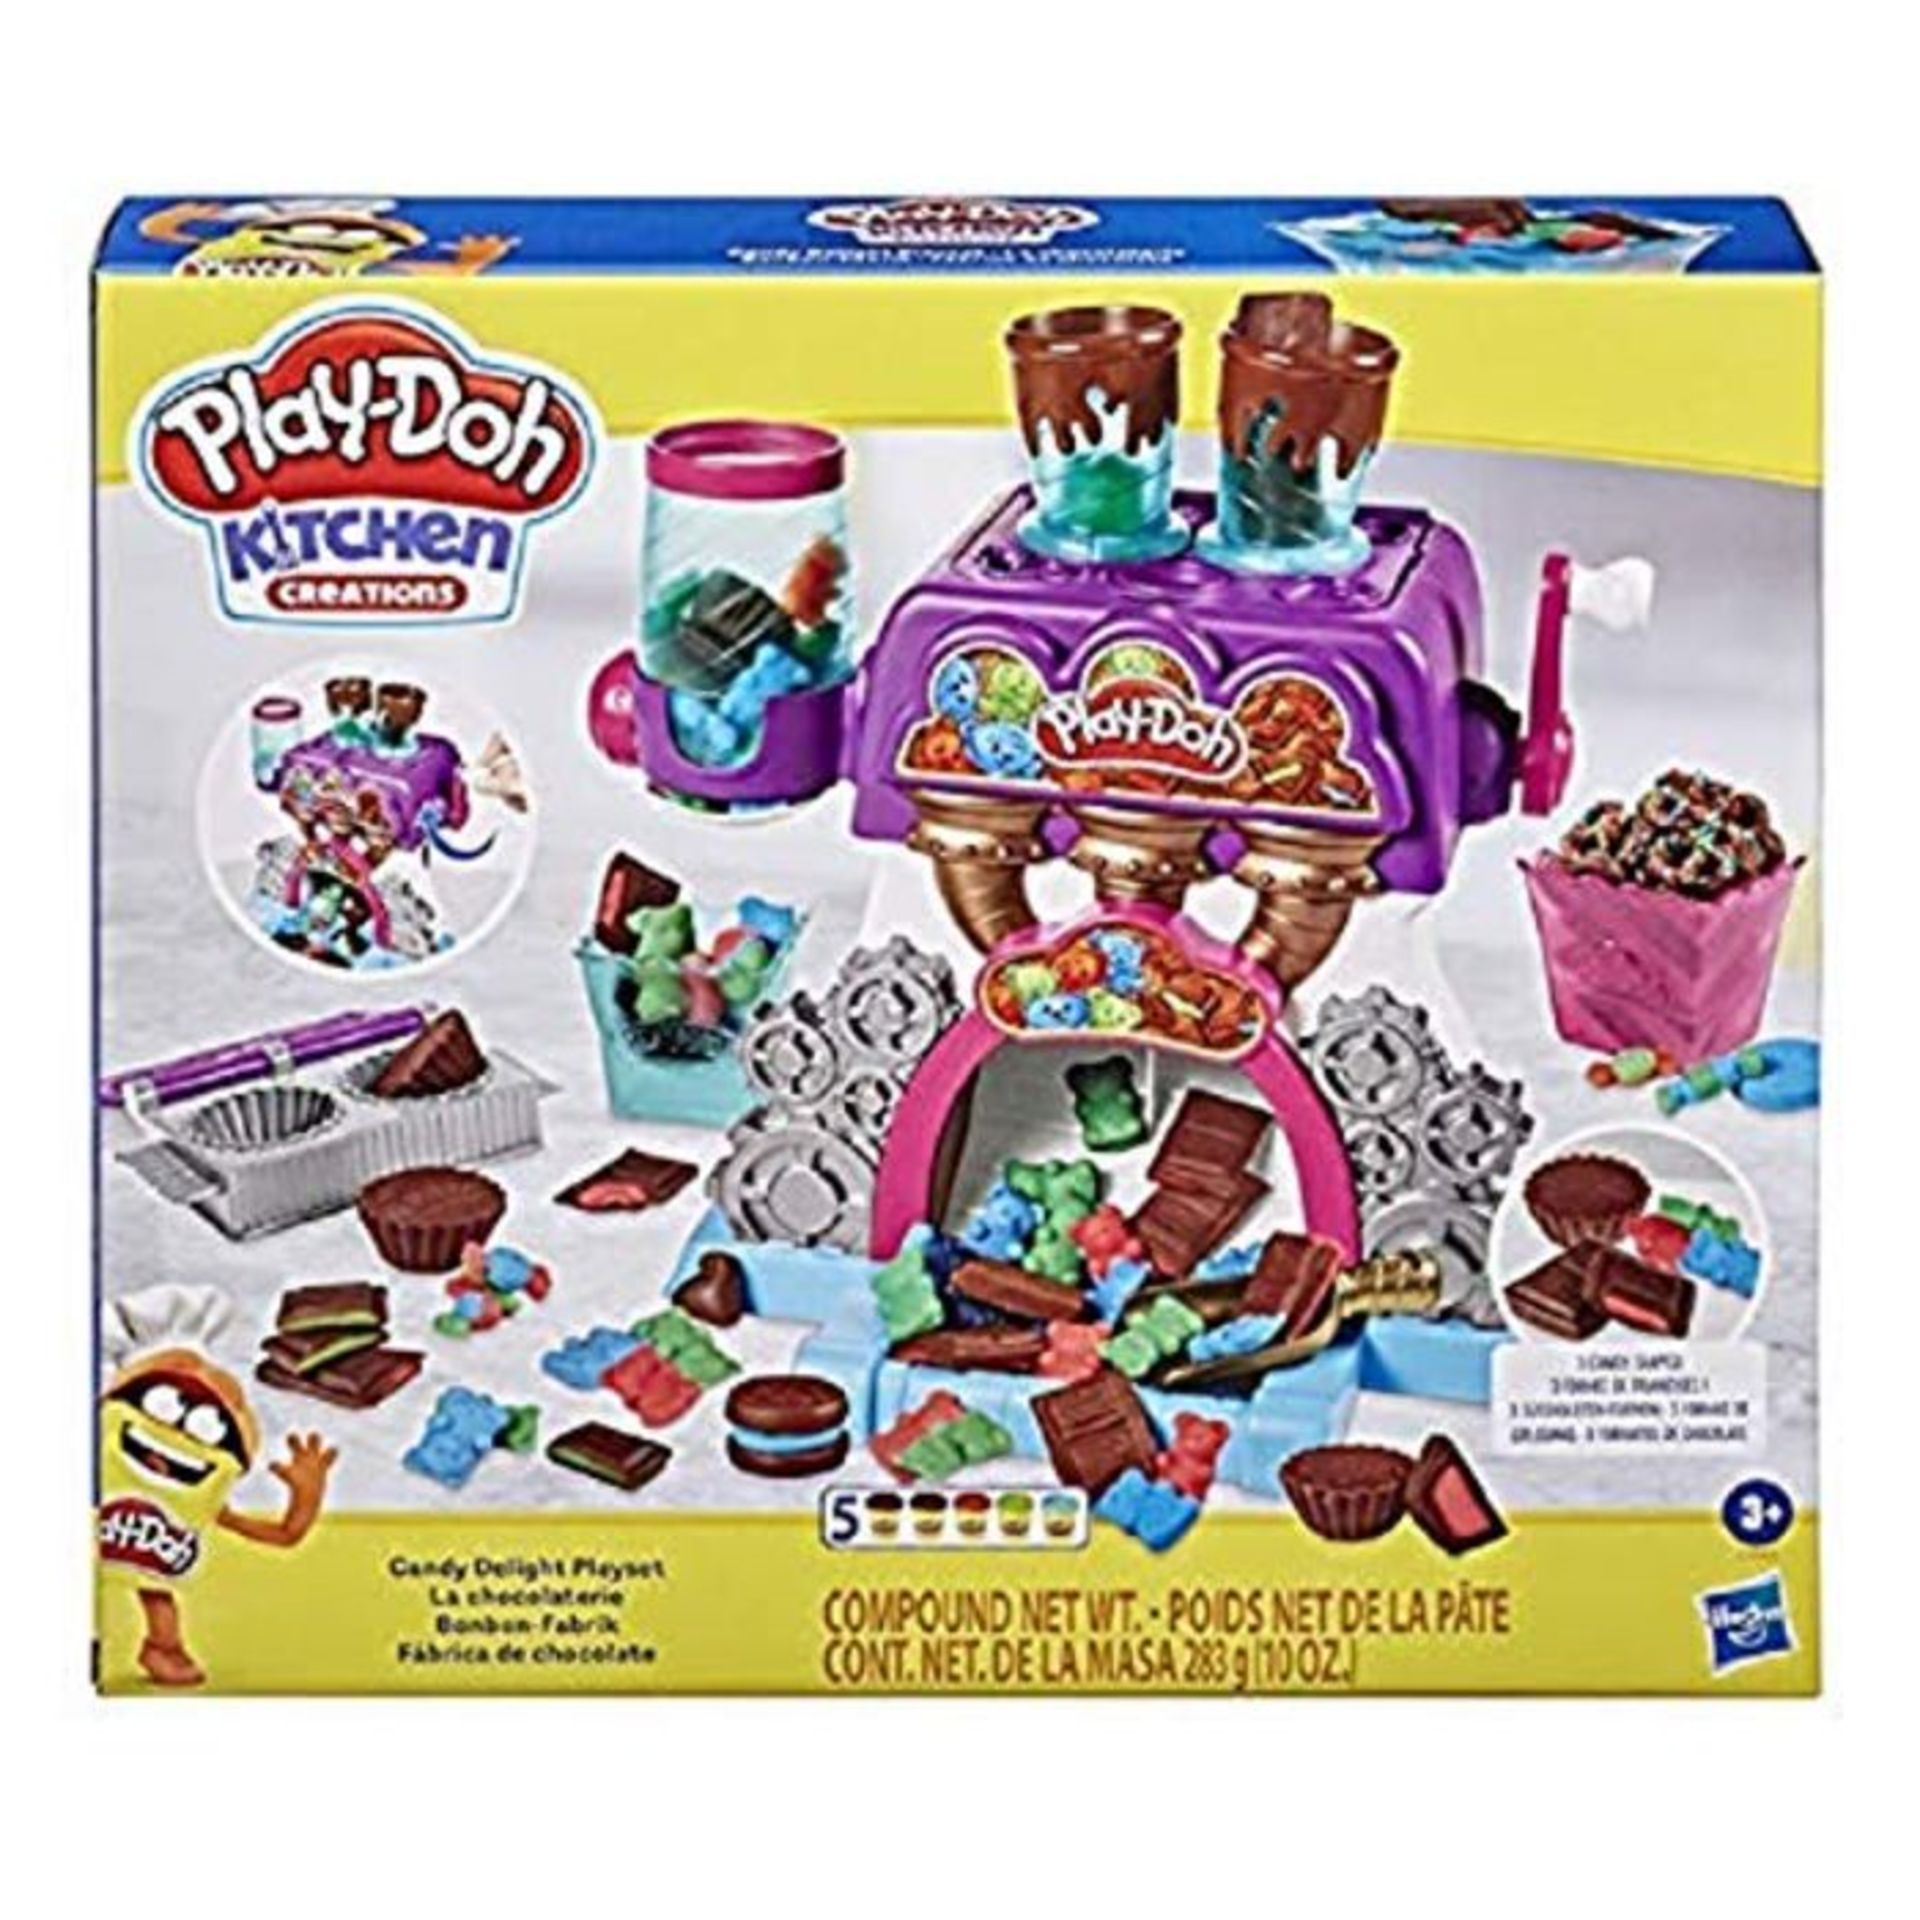 Play-Doh Kitchen Creations Candy Delight Playset for Kids 3 Years and Up with 5 Cans,